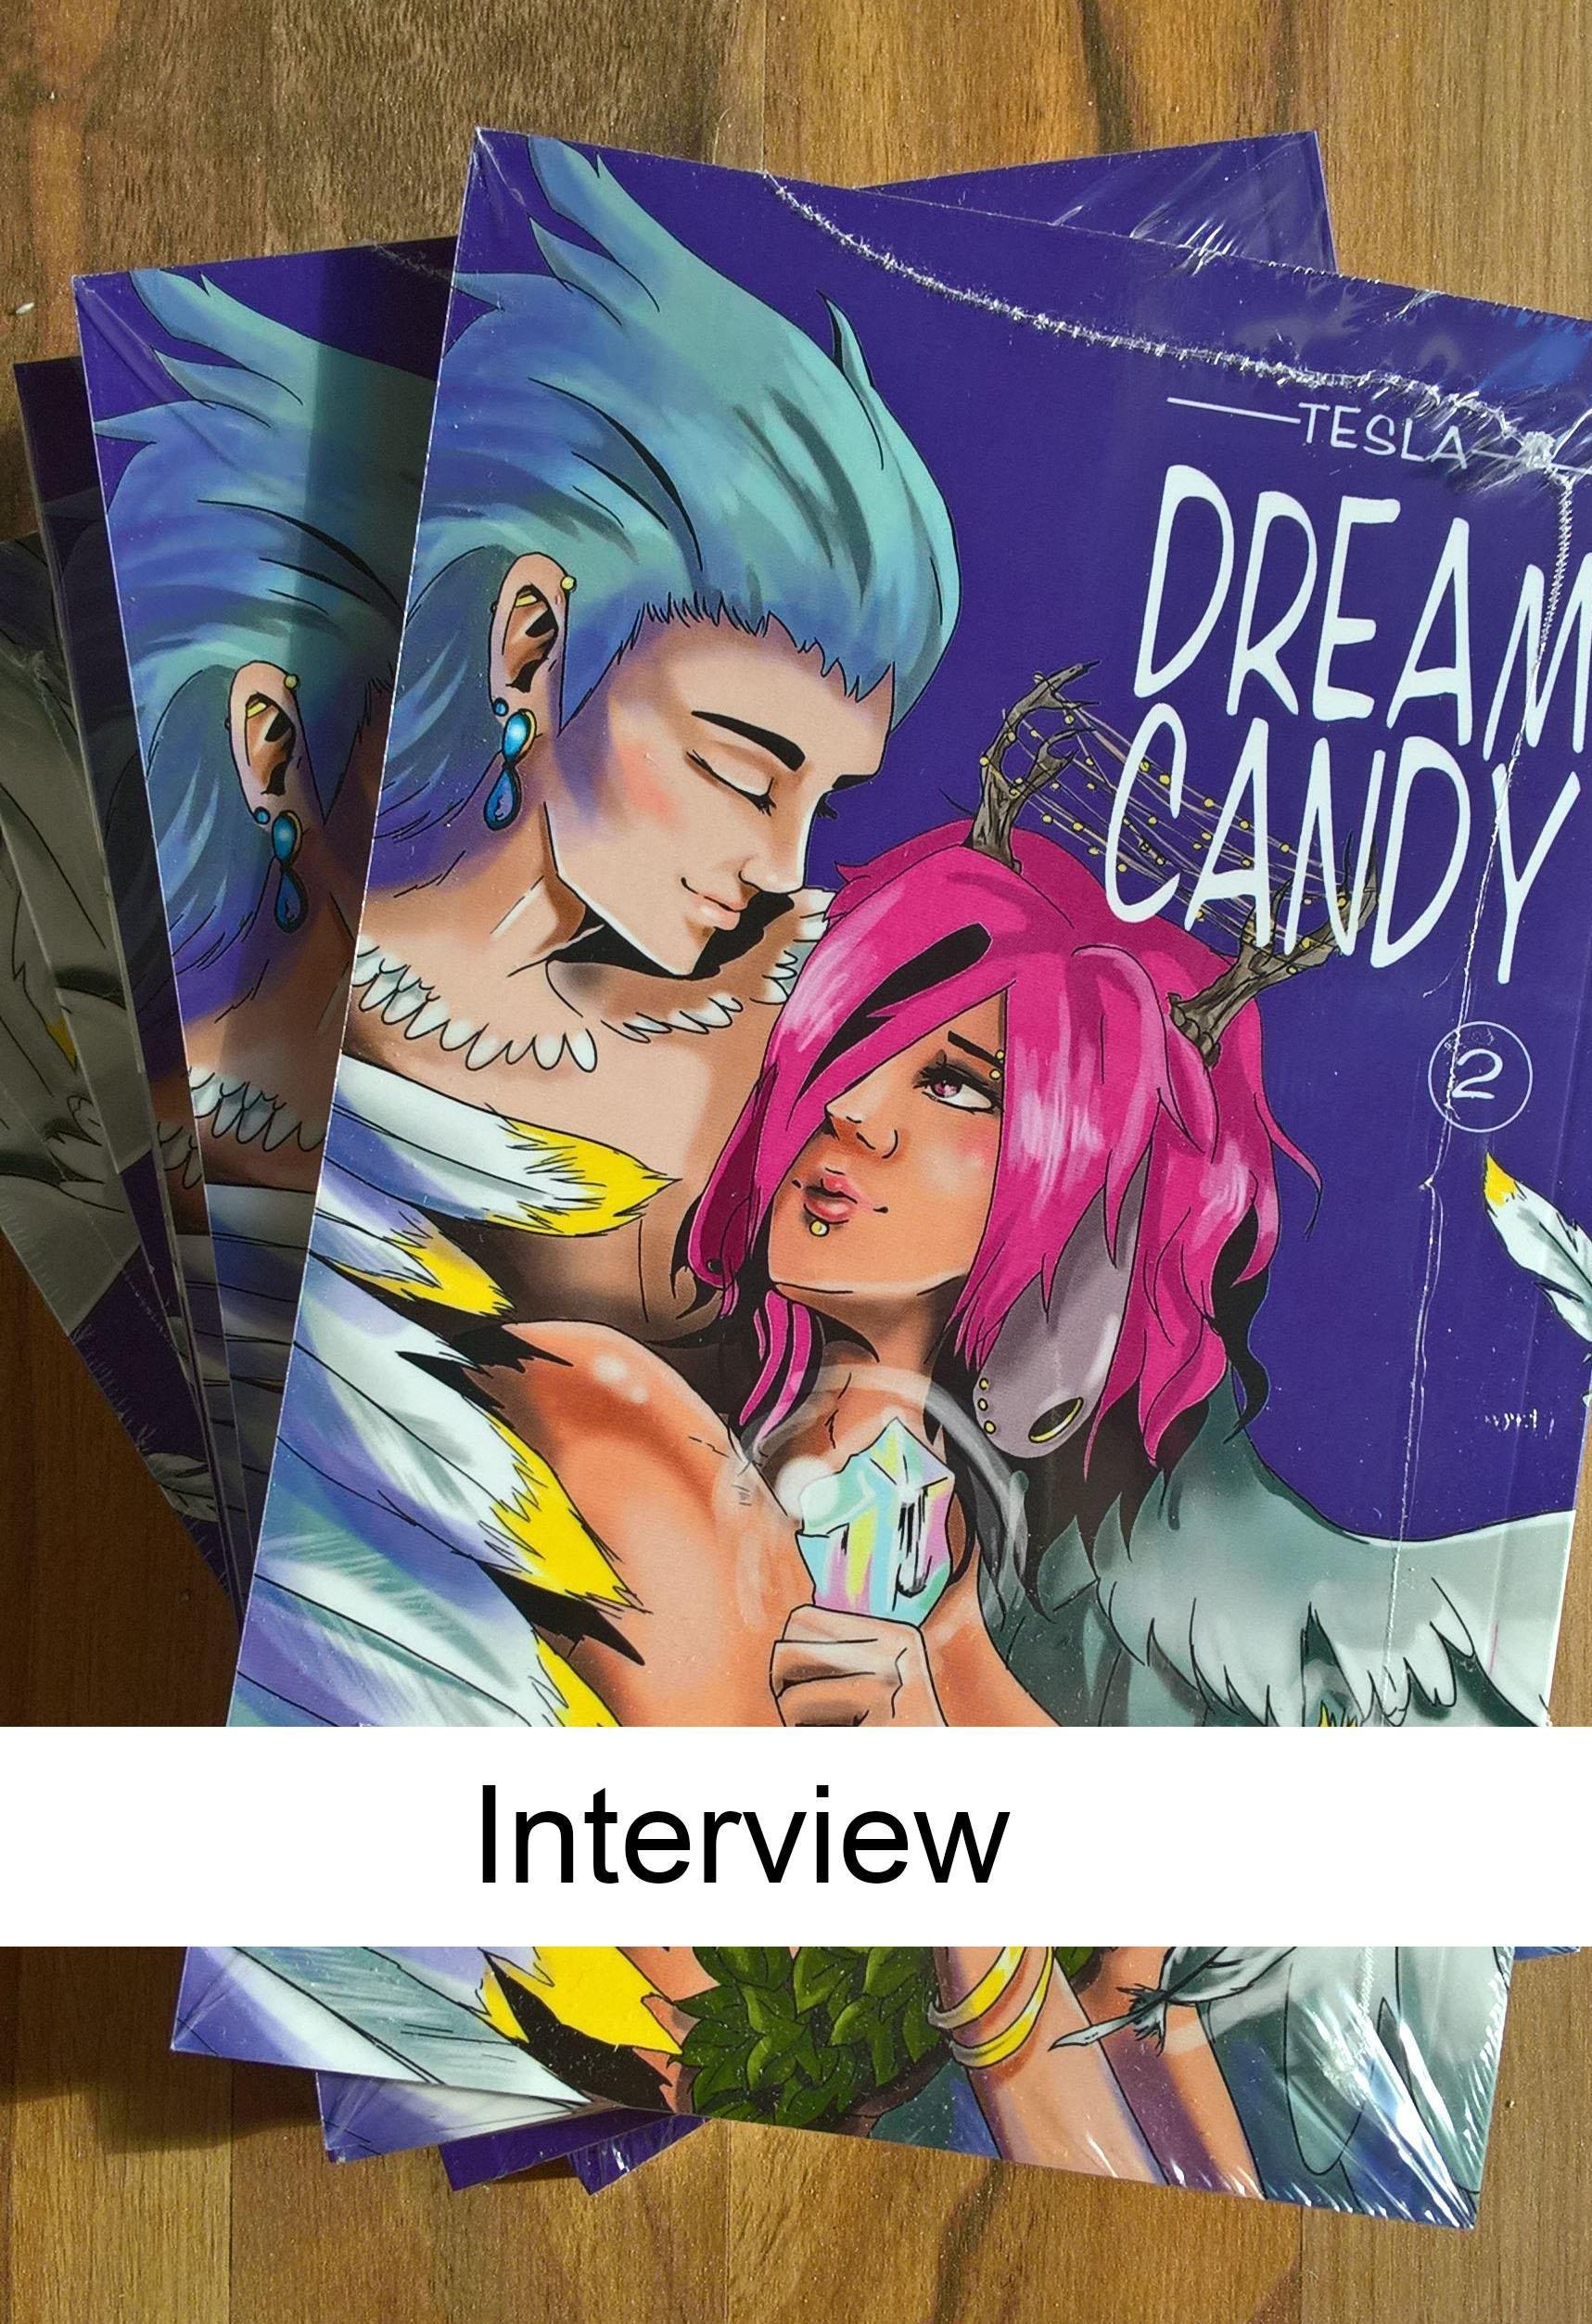 [Interview] Tesla - Dreamcandy Band 2 - Yaoi mal anders